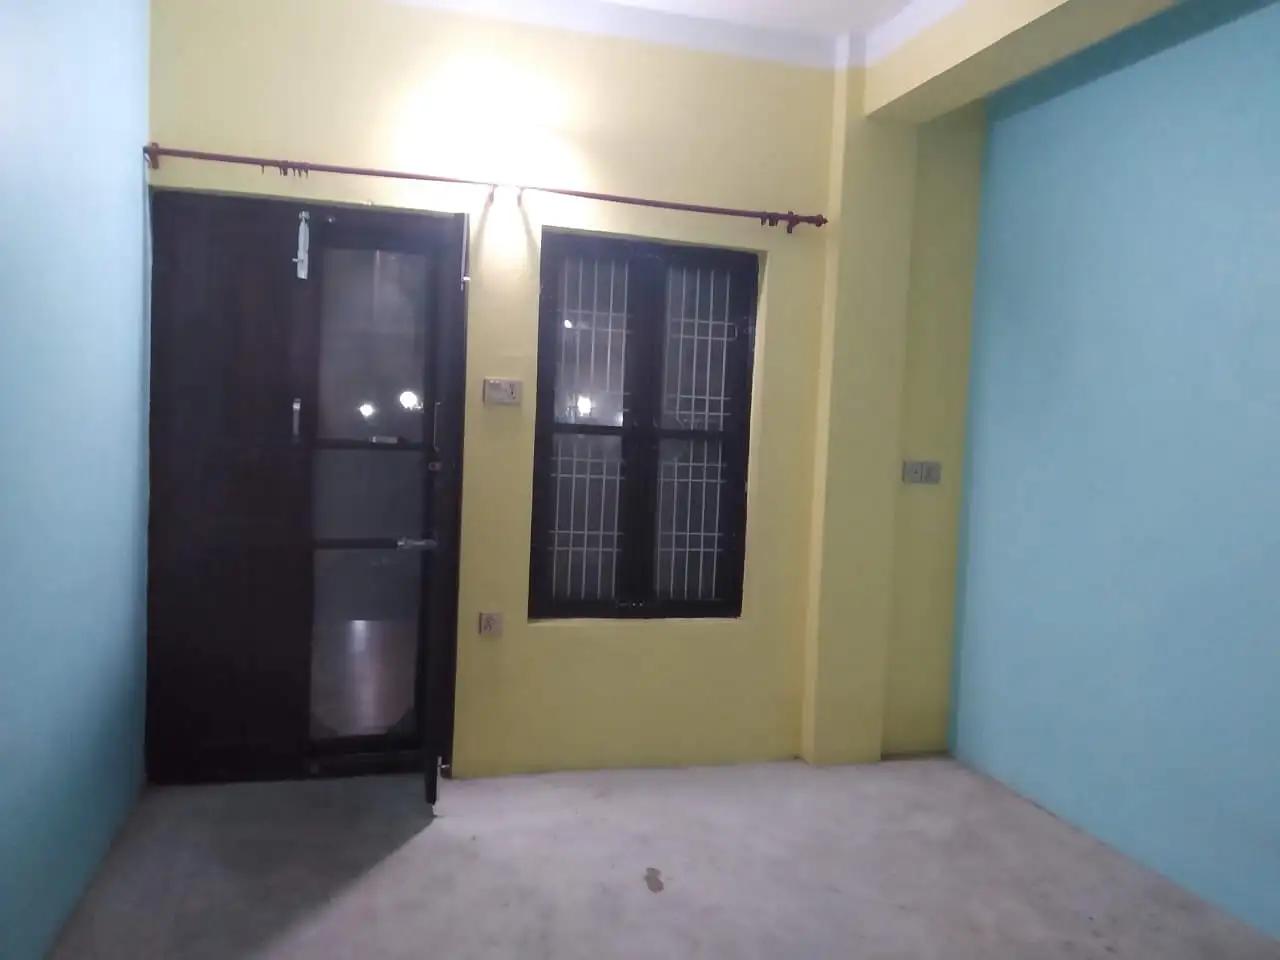 Flat (House) for Rent in Bharatpur, Chitwan-image-3